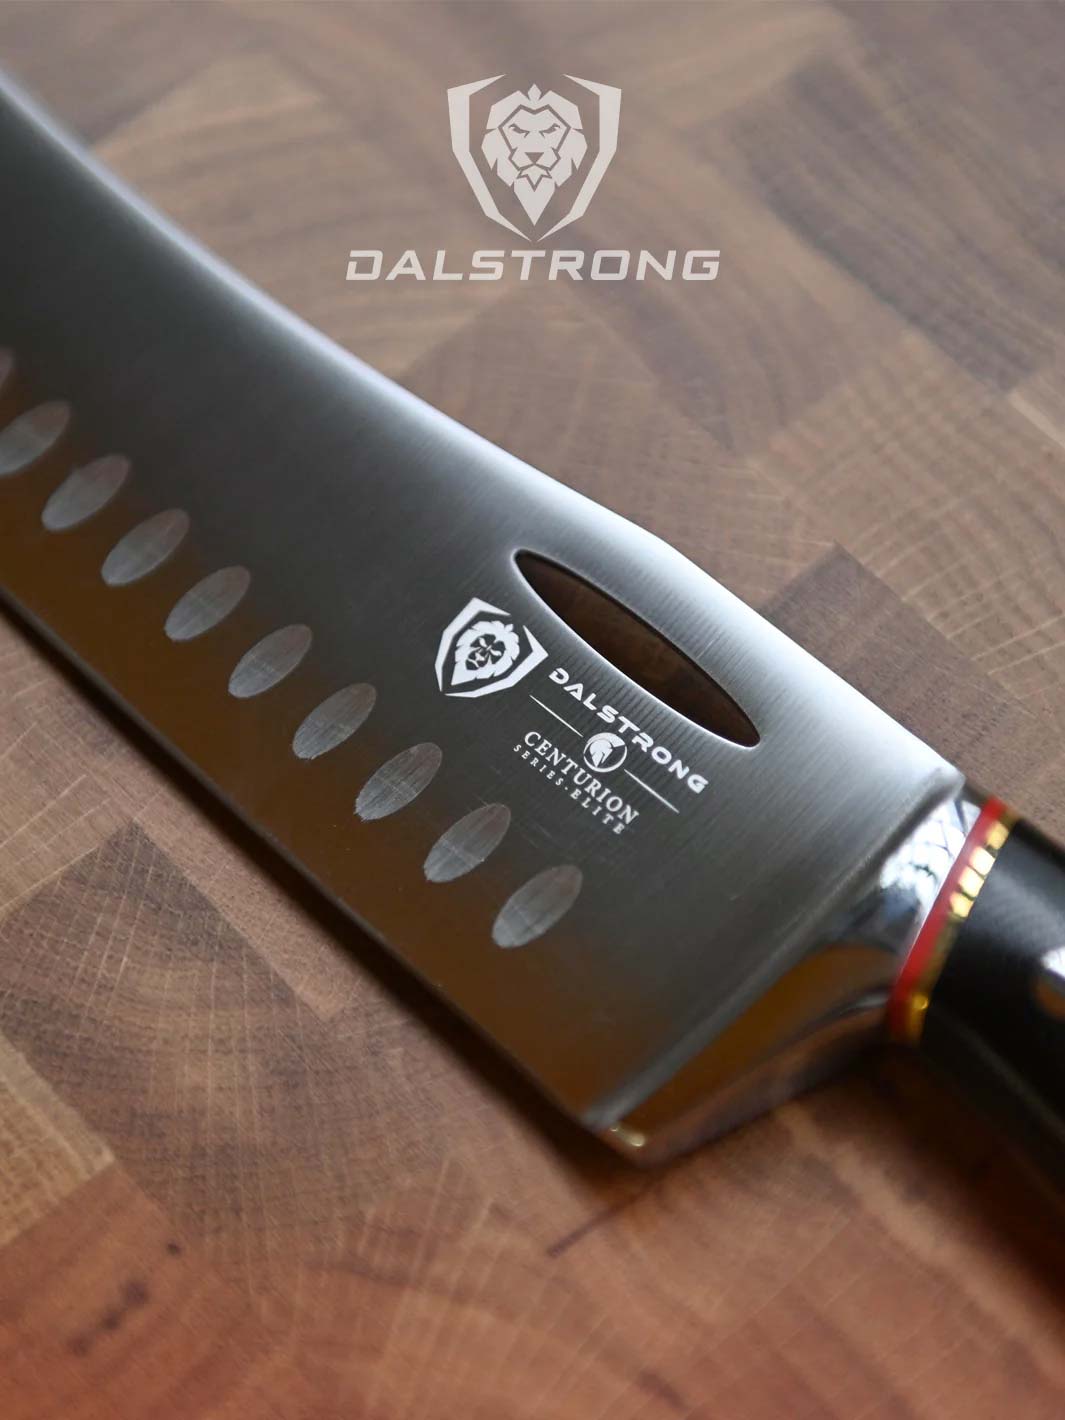 Dalstrong centurion series 7 inch nakiri knife featuring it's blade.